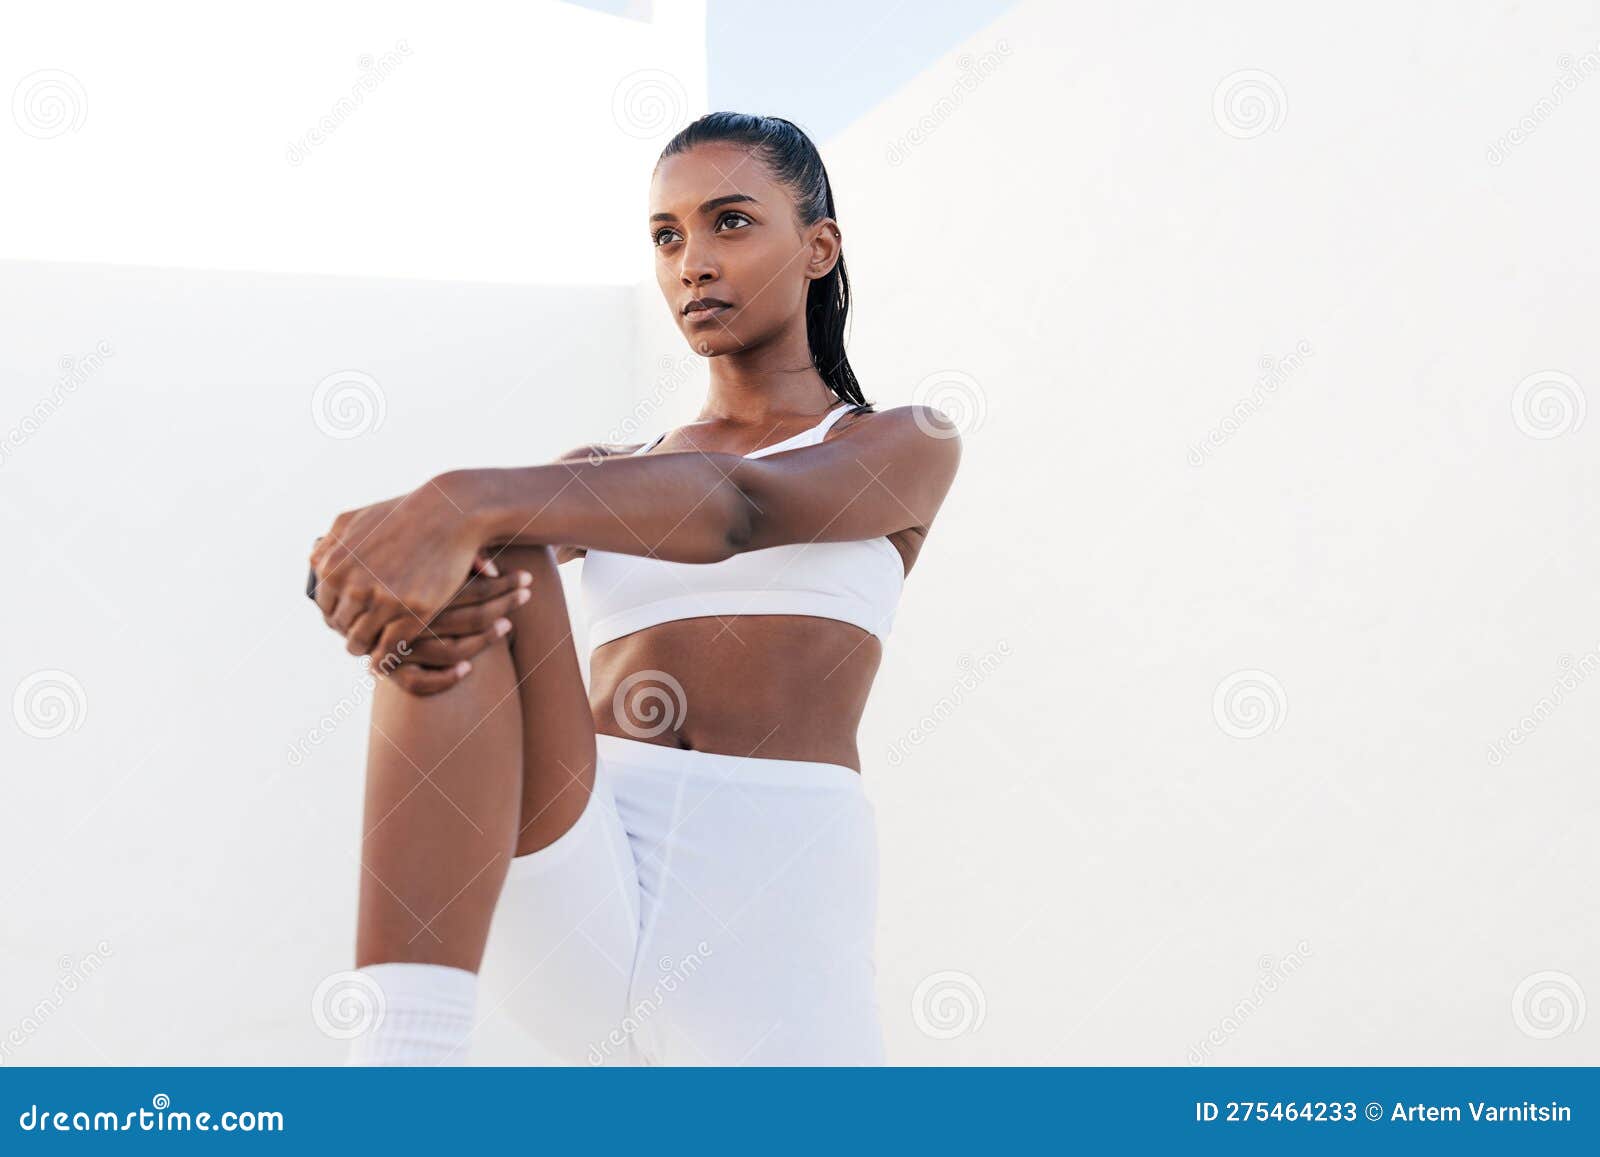 Portrait of a slim female in white fitness attire standing in an